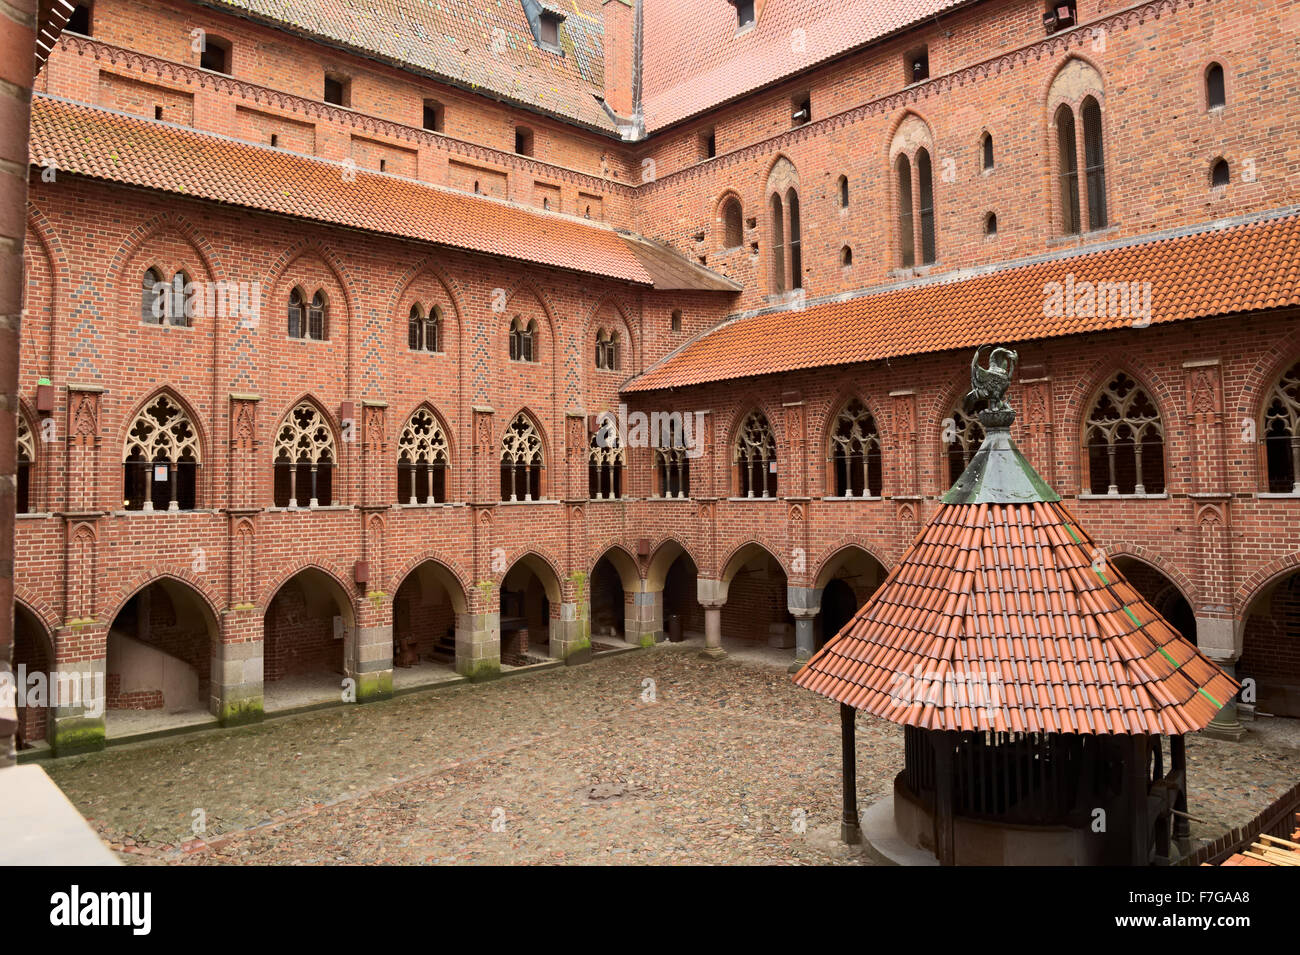 Yard with arcades and galleries in the medieval Castle of the Teutonic Order in Malbork (Marienburg), Poland. Stock Photo